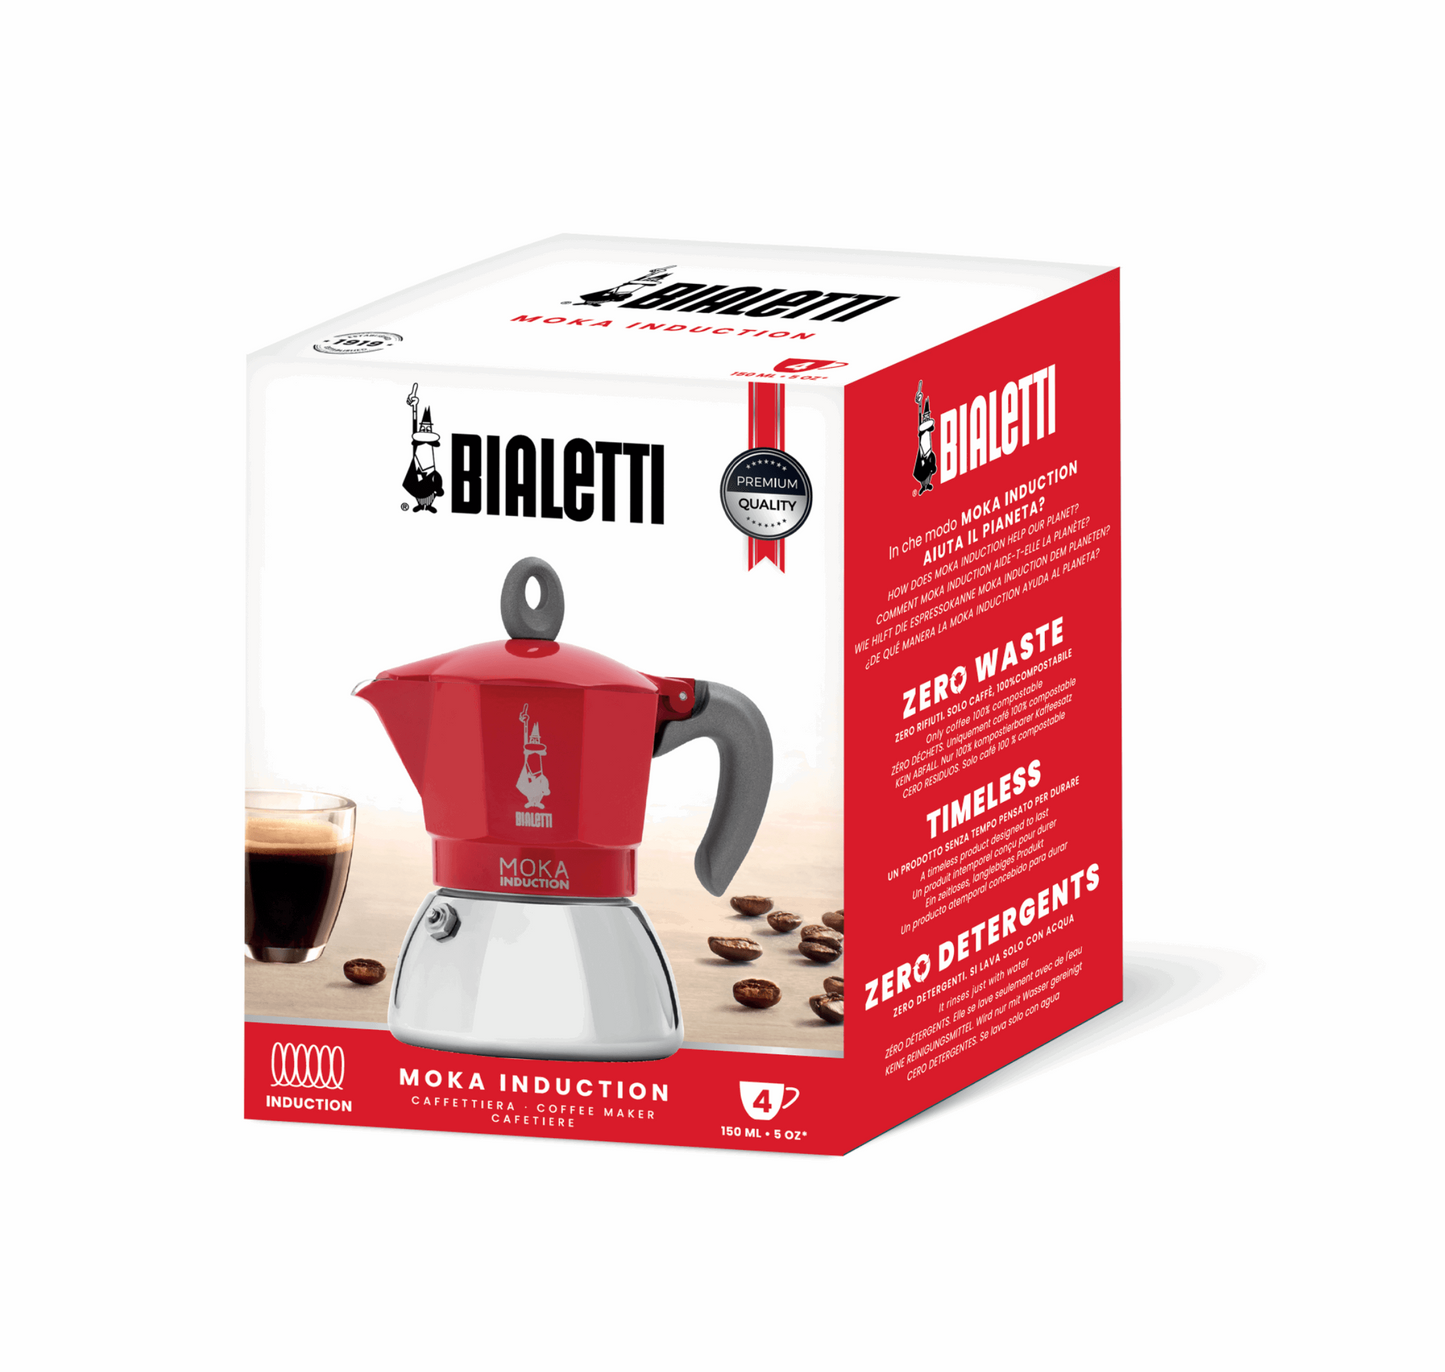 packaging for Bialetti Moka Induction UK